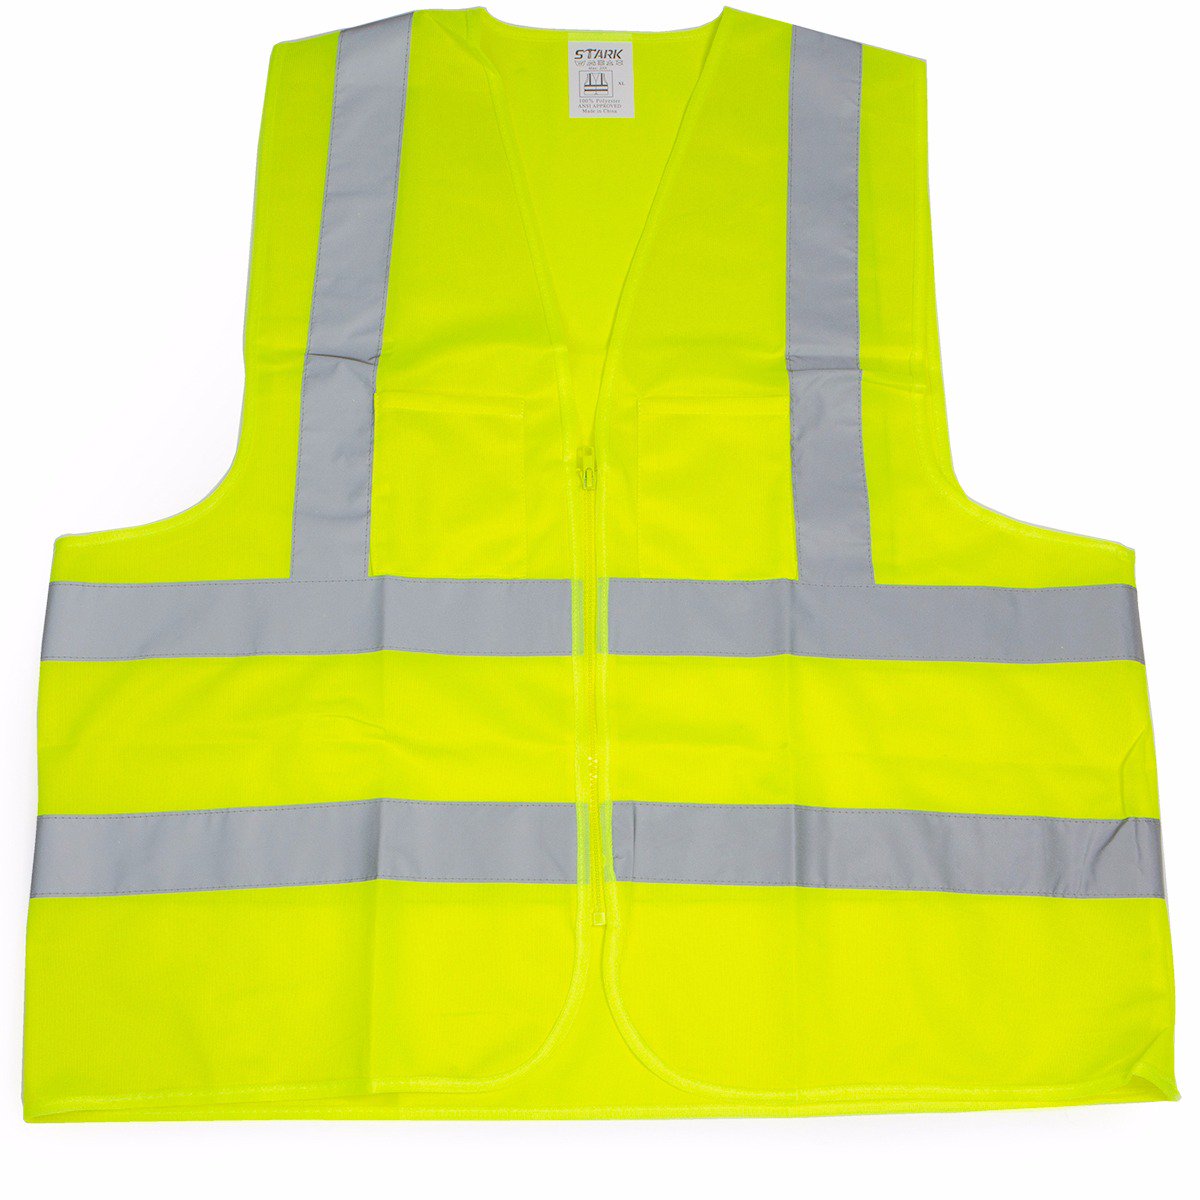 Safety Vest Dealers in Bahrain | Importers | Companies | Suppliers